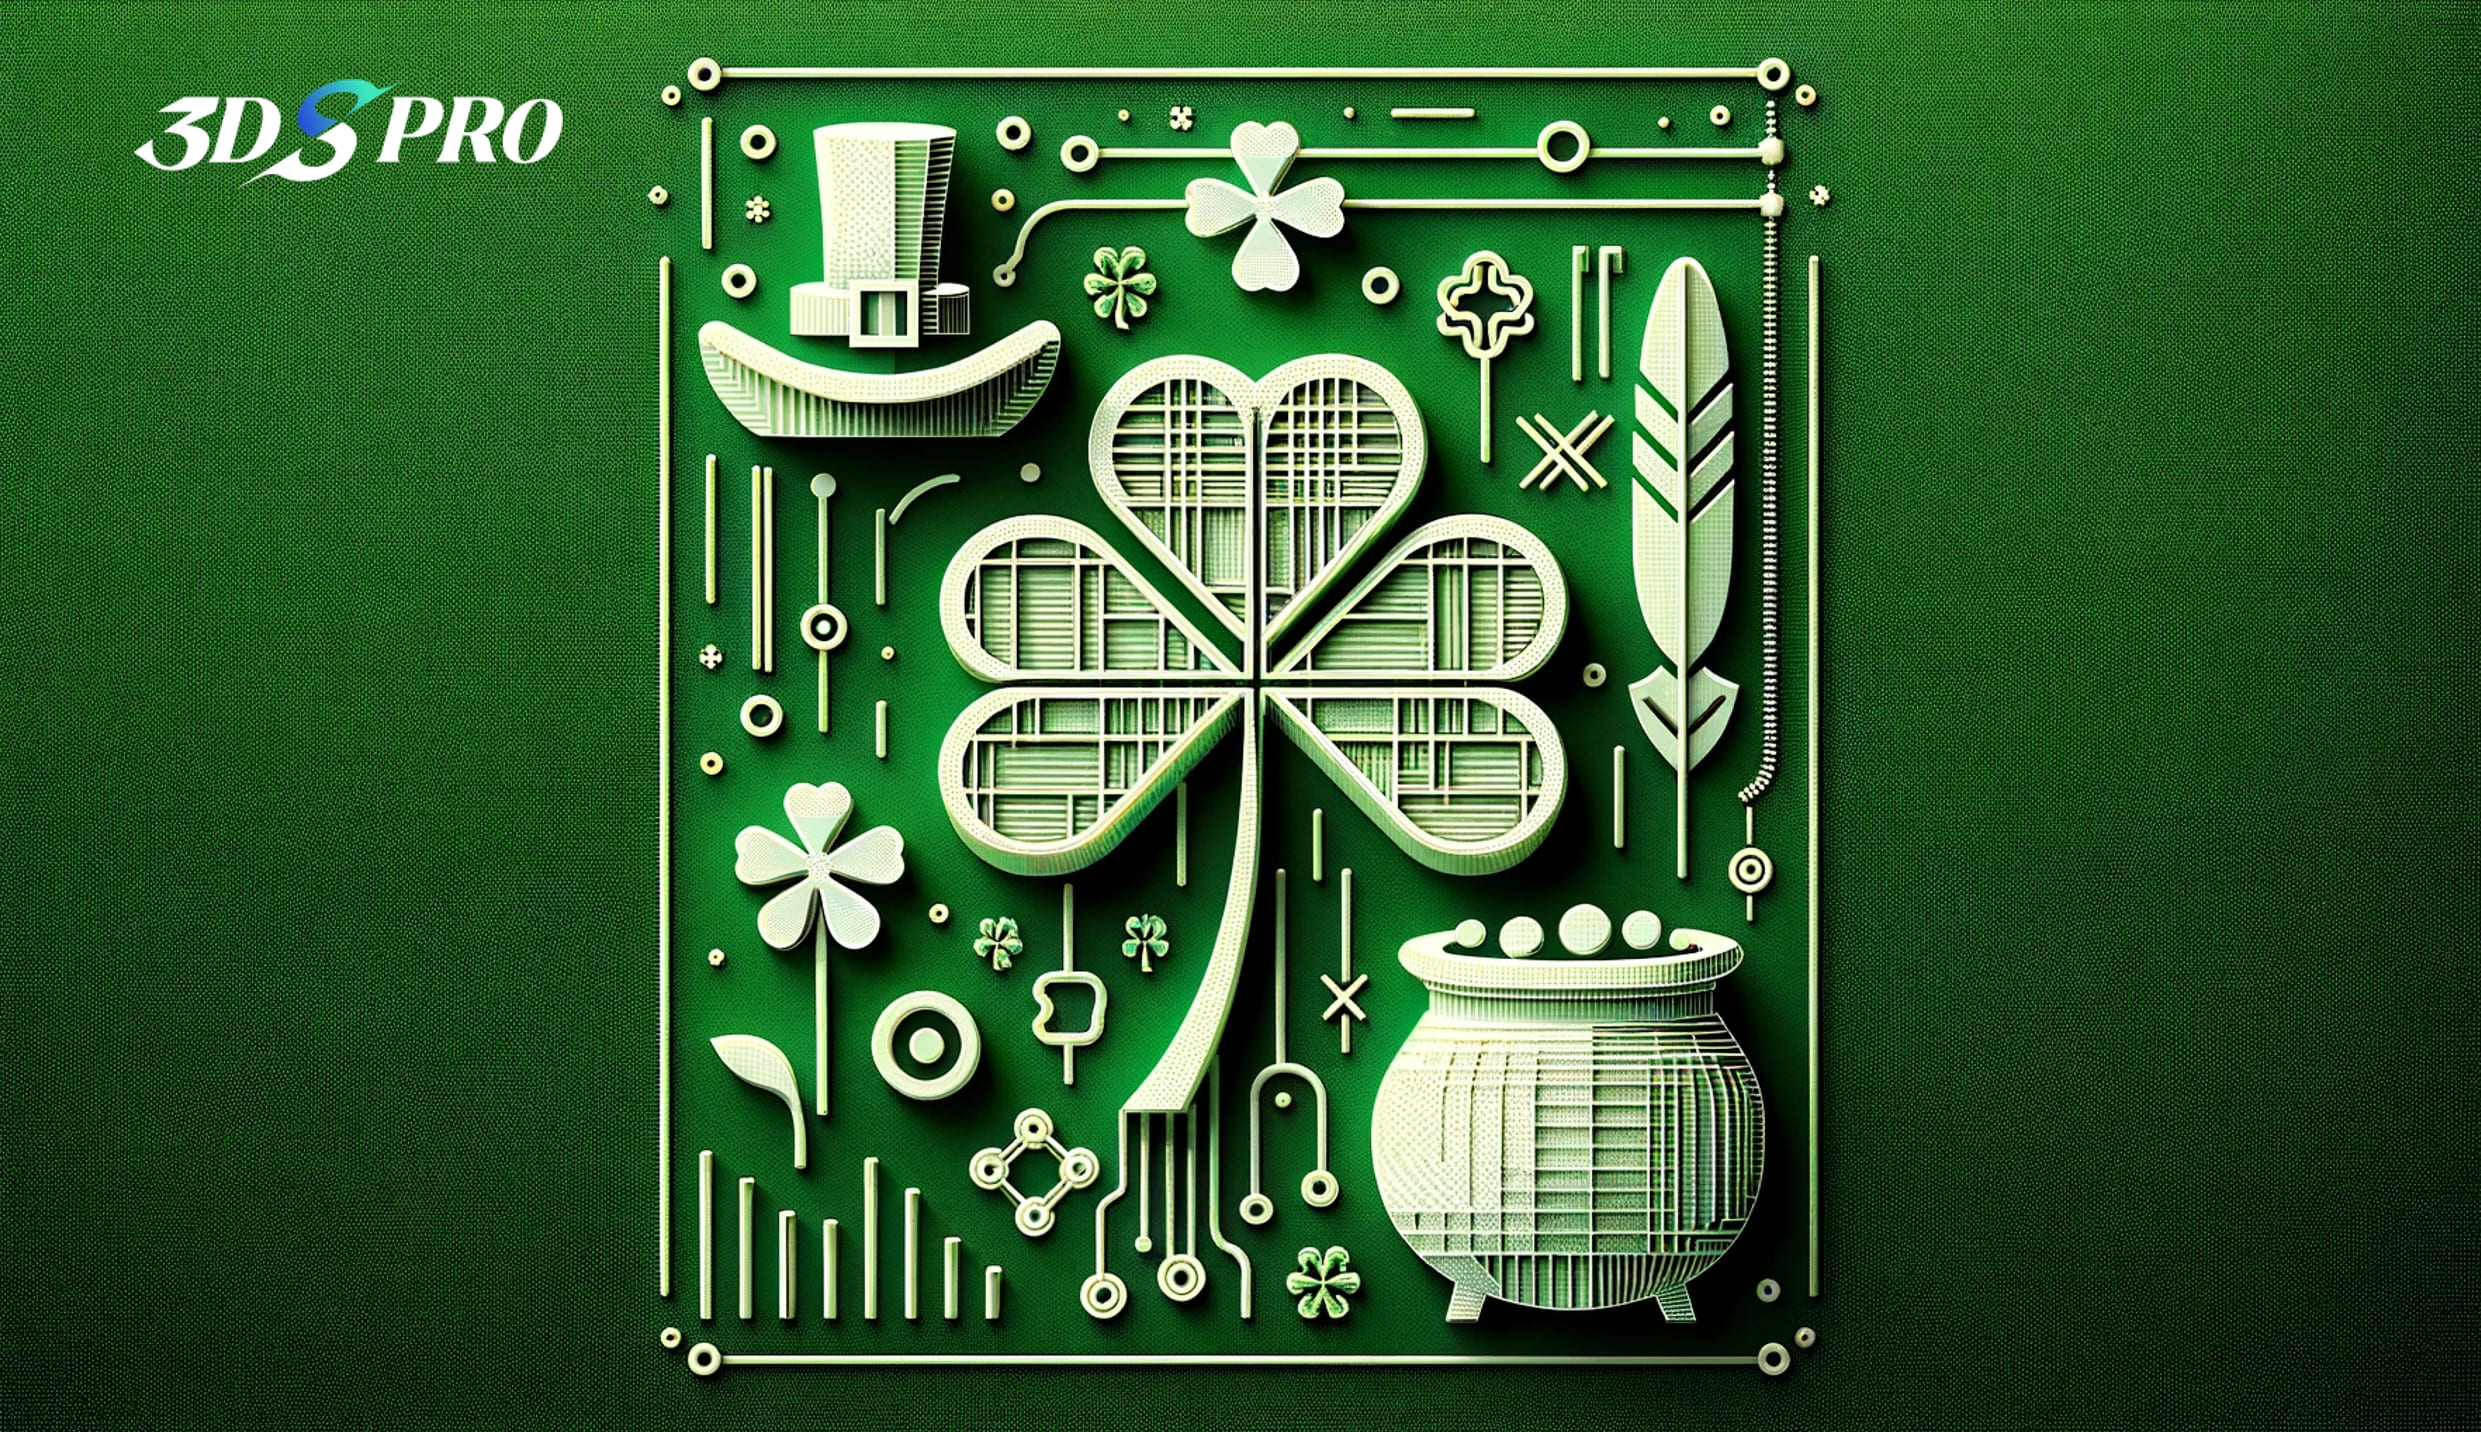 Happy Saint Patrick's Day from 3DSPRO